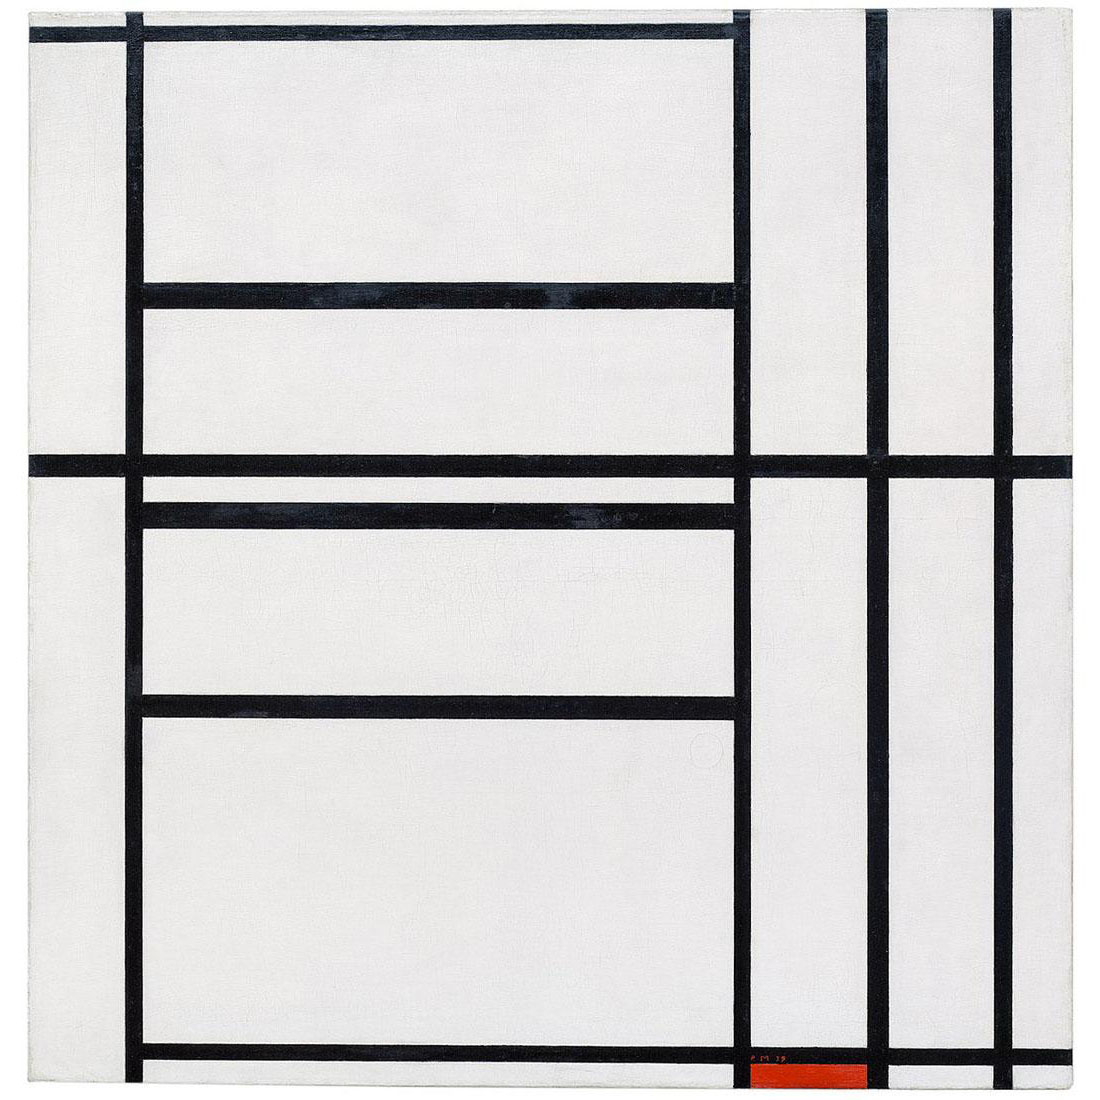 Piet Mondriaan. Composition No. 1 with Grey and Red. 1938-1939. Guggenheim Museun